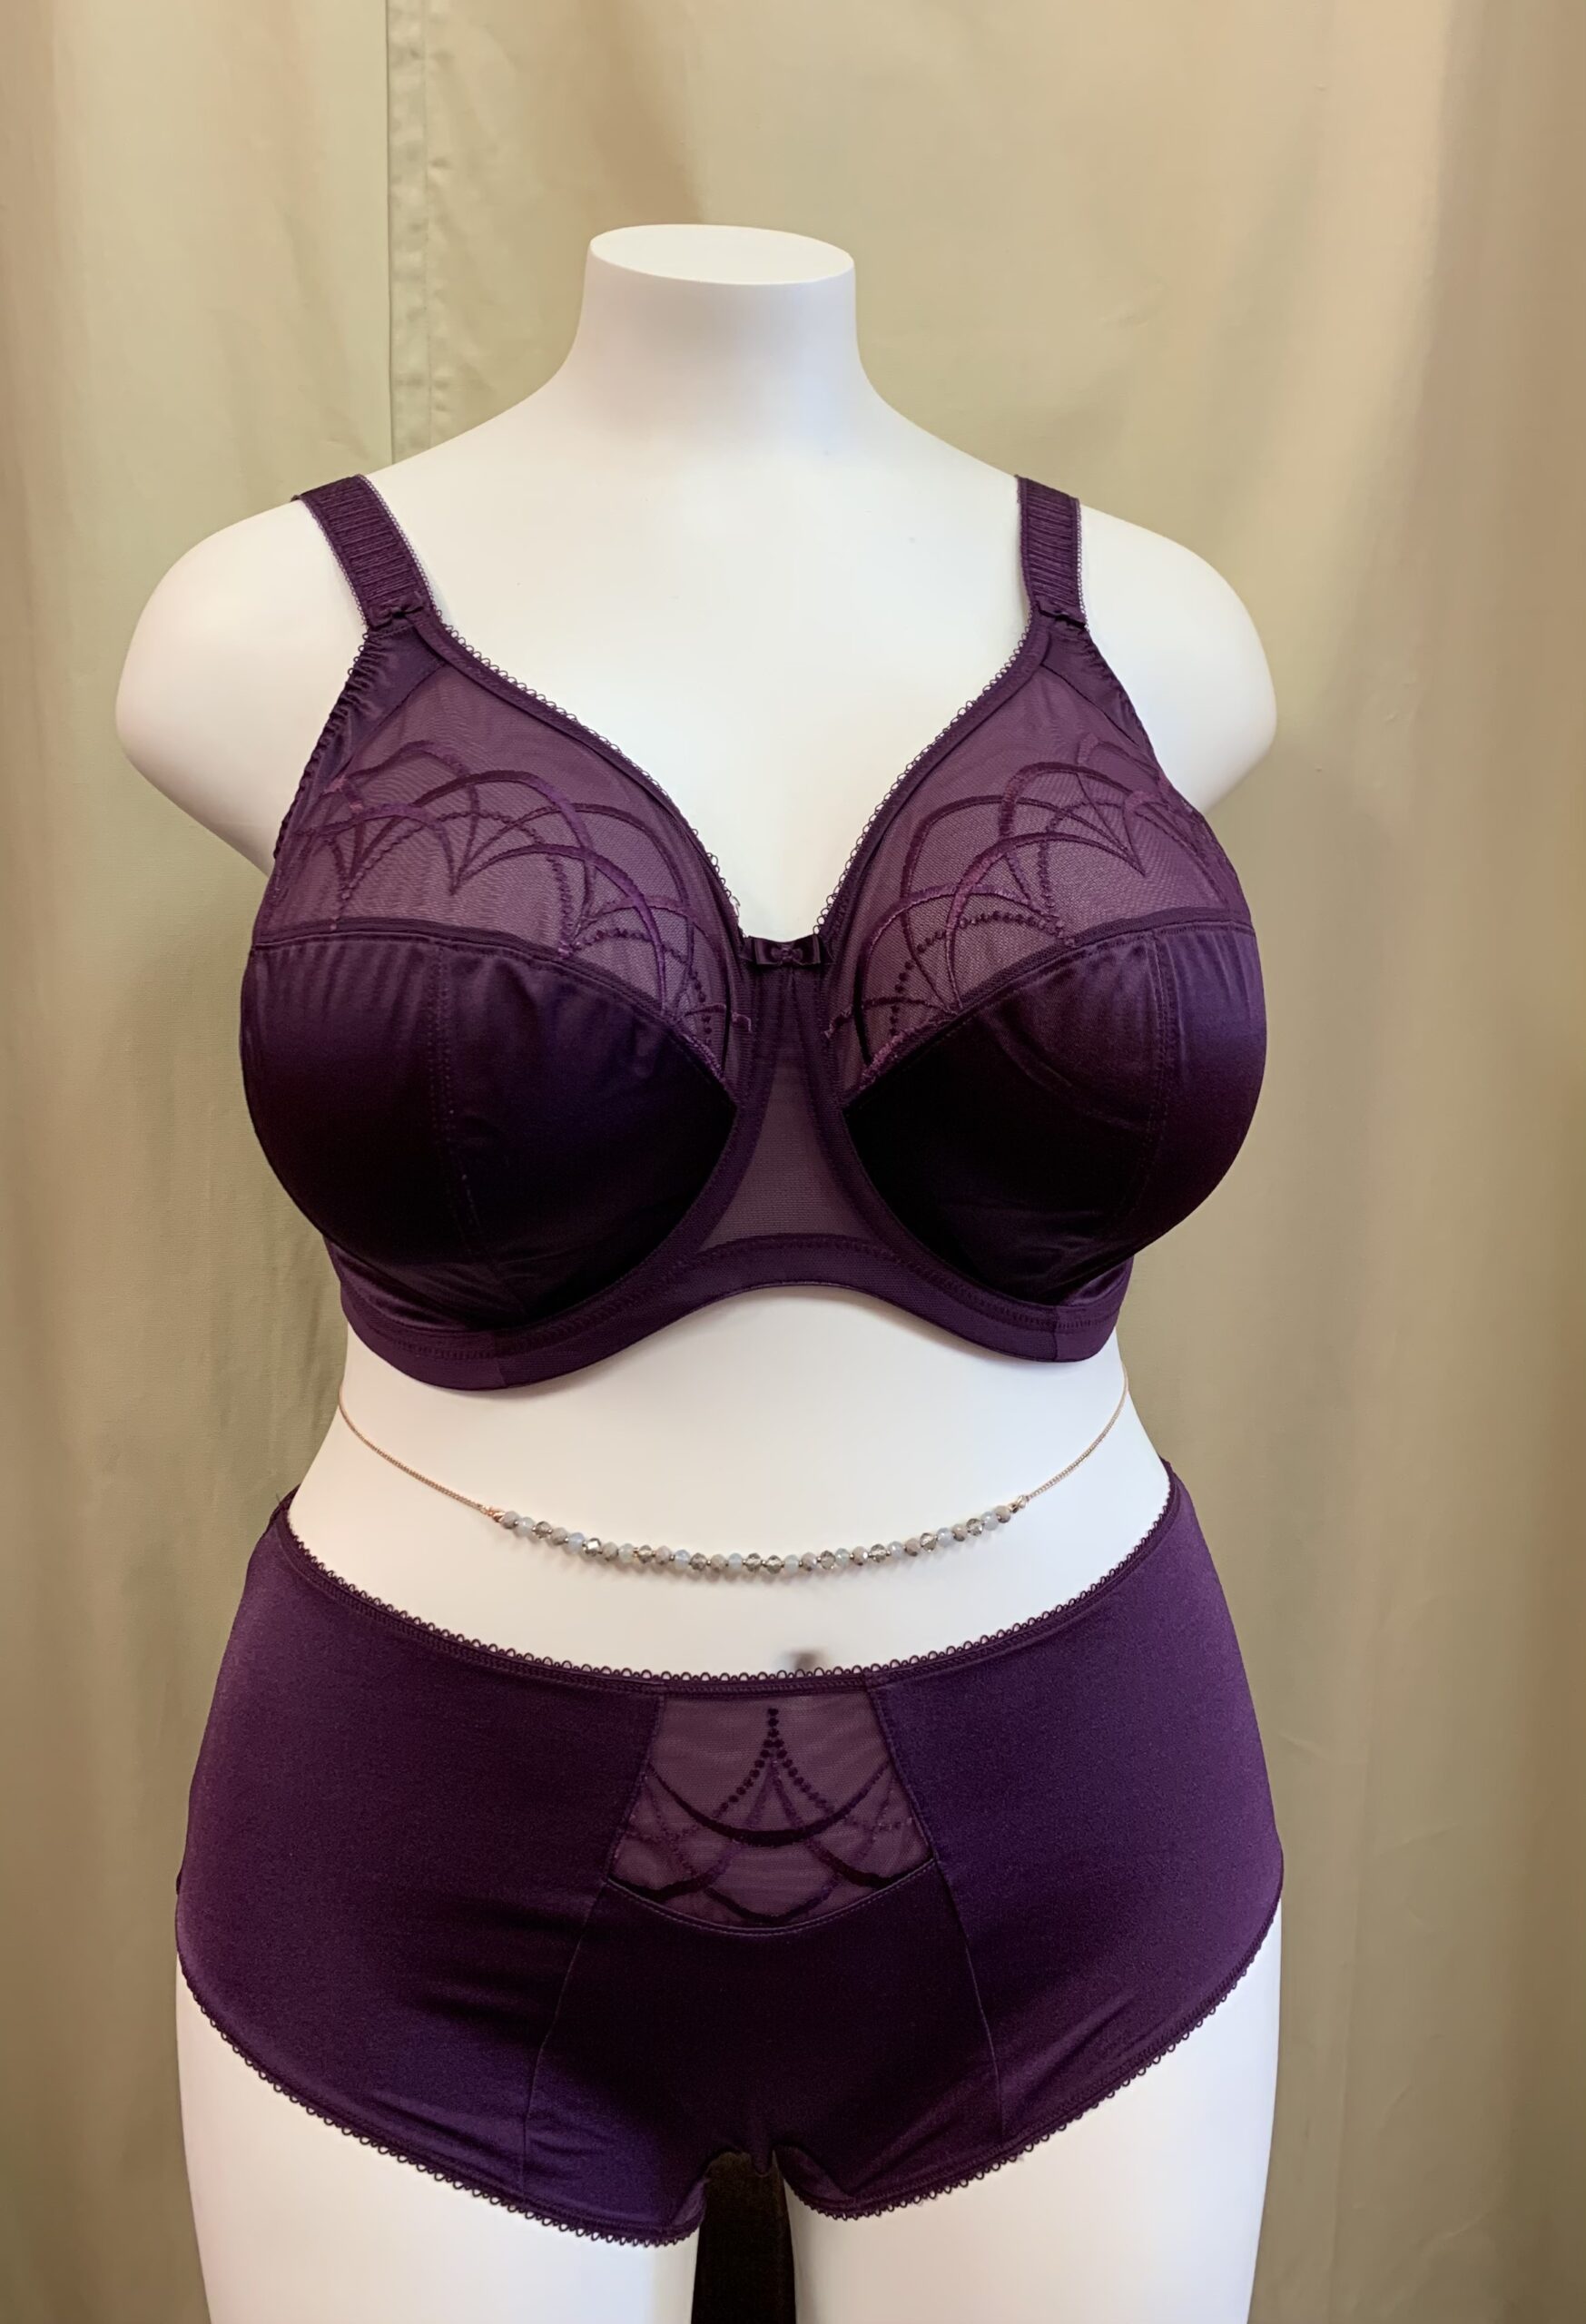 View our Nice New Arrival Bras in Raleigh, NC at The Bra Patch